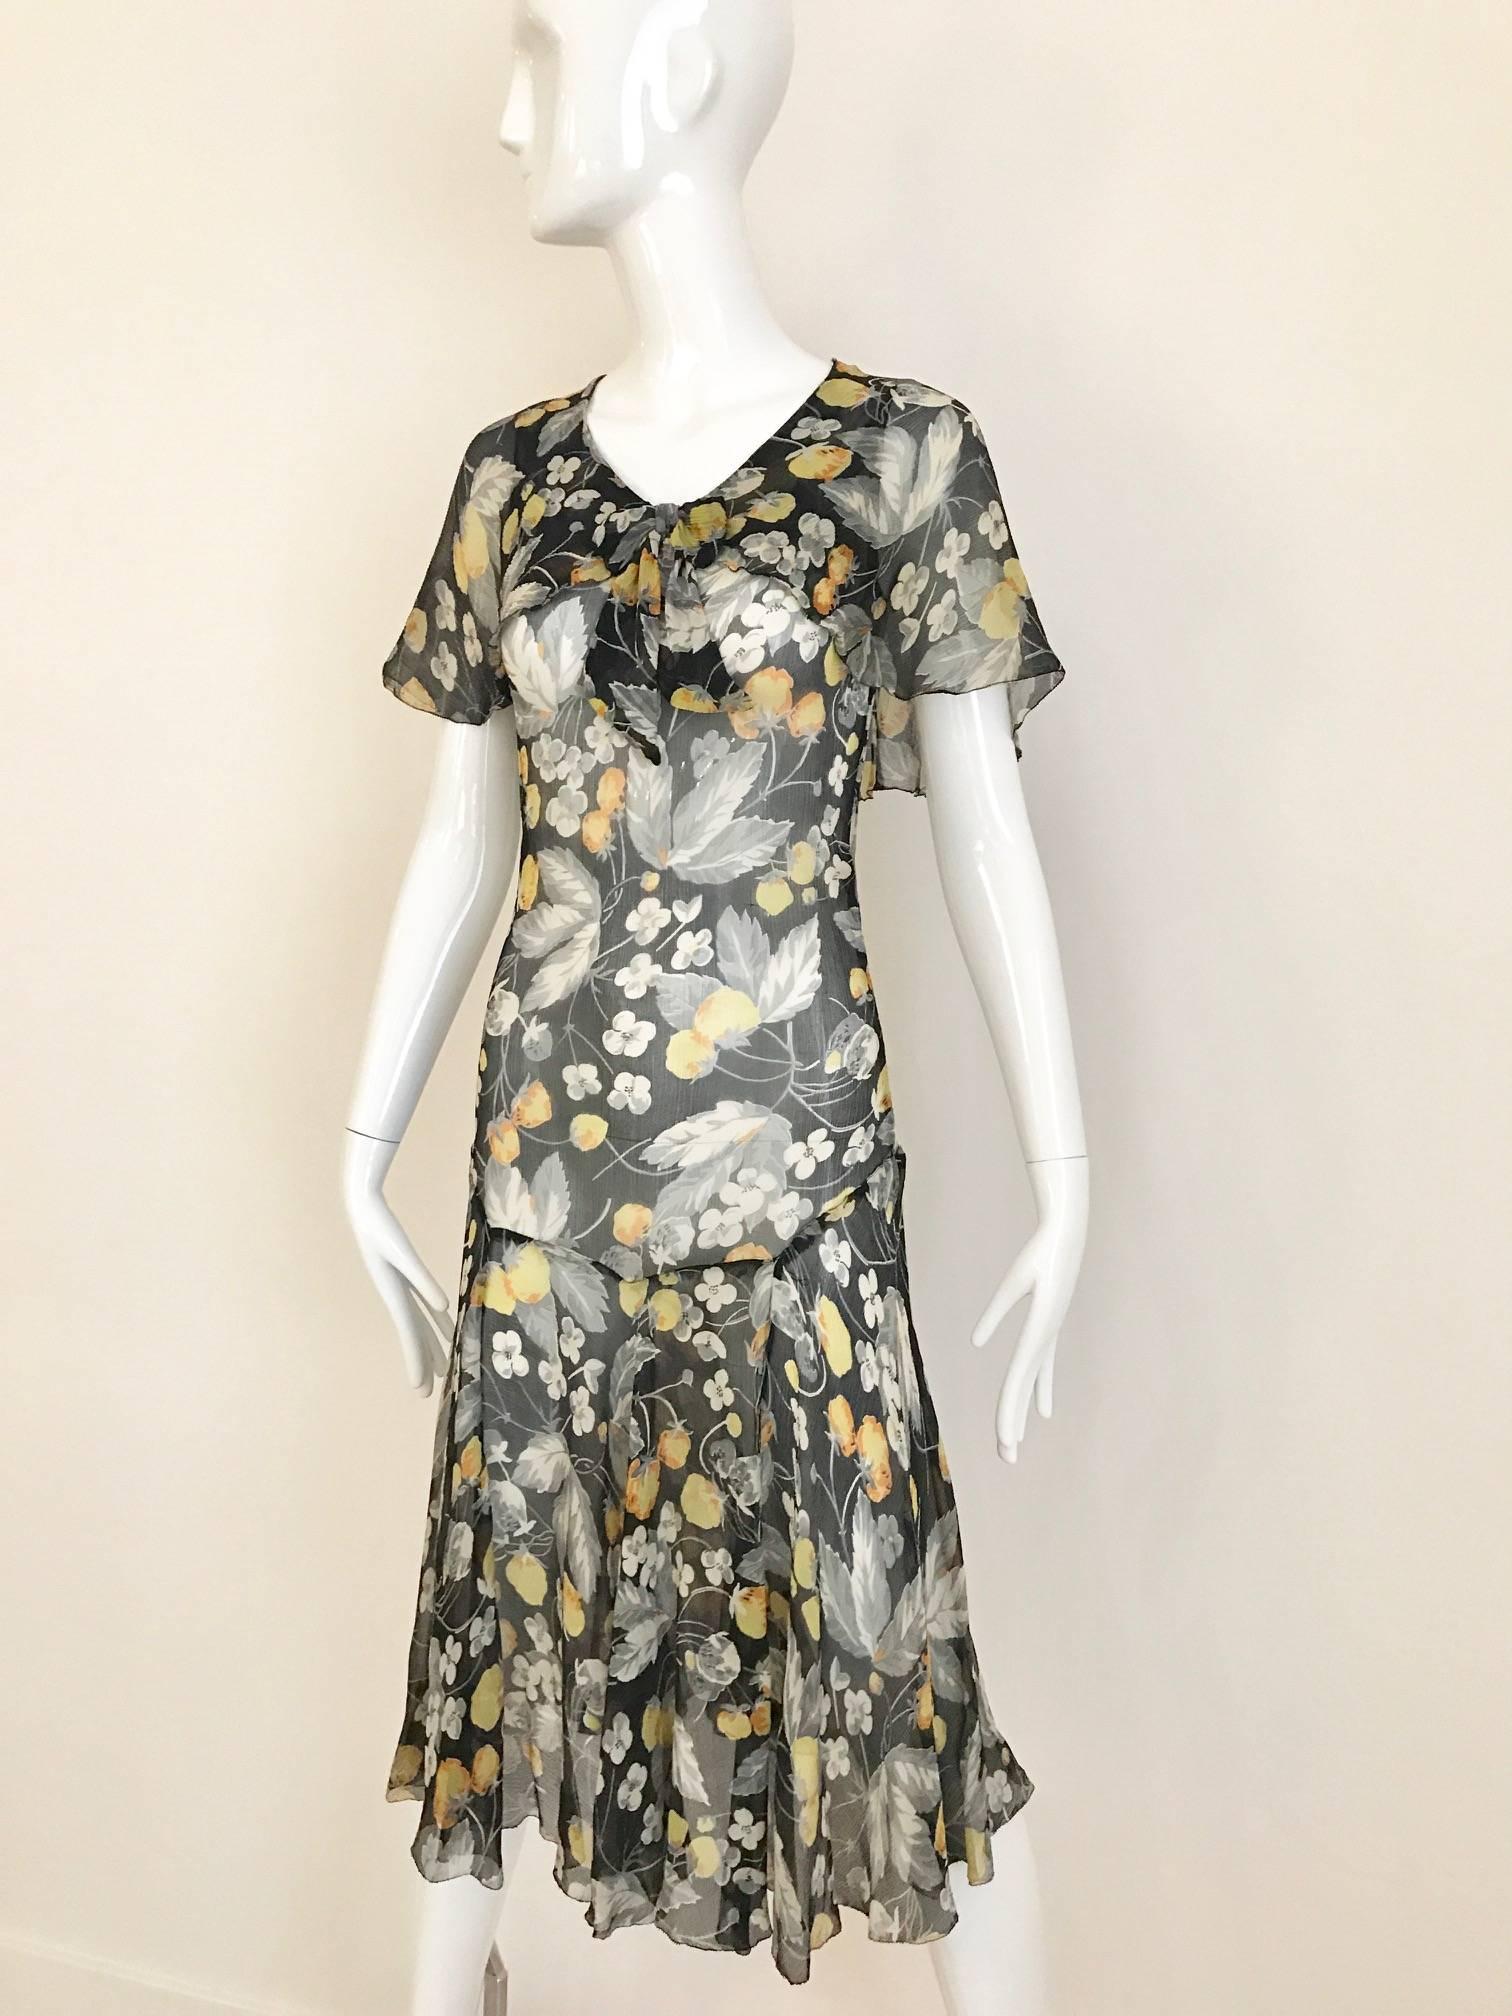 Beautiful vintage floral print in yellow, grey, and white . small bow on the neck line, flutter sleeves and slip on dress. Dress has no snap or zipper. 
Size: XSmall or small for petite 
Bust 32 inch / Waist: 24 inch  / Hip 33 inch / Dress length: